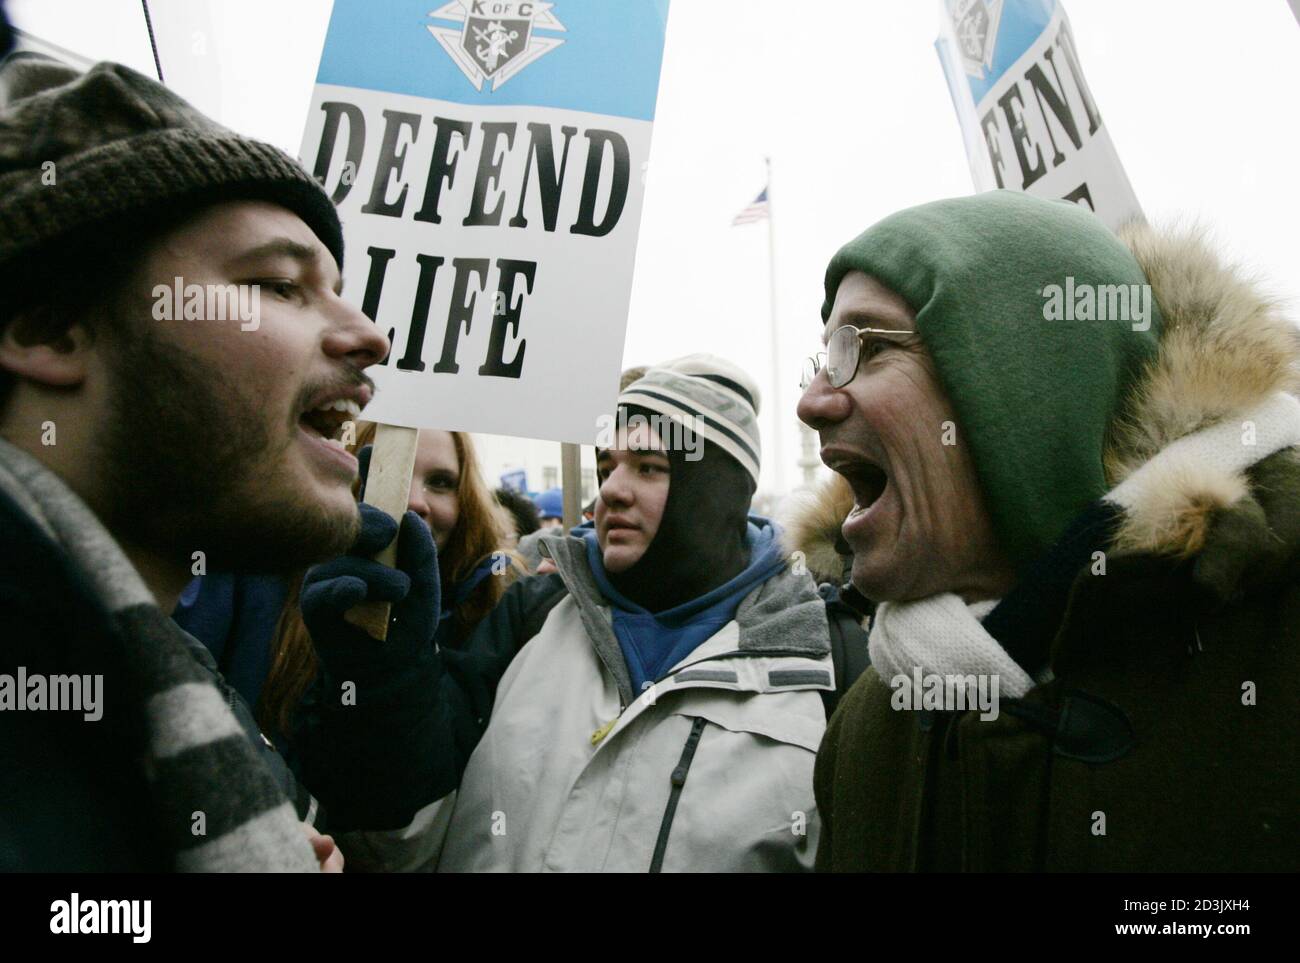 Pro-choice activist Luqman Clark of Arlington, Virginia (L) argues with an anti-Abortion protestor outside the U.S. Supreme Court, in Washington, January 24, 2005. Thousands of pro-life activists marched to the Supreme Court where they were met by a handful of pro-choice campaigners on the 32nd anniversary of the Supreme Court's decision in the Roe v. Wade abortion rights decision. REUTERS/Jason Reed  JIR/GN Stock Photo